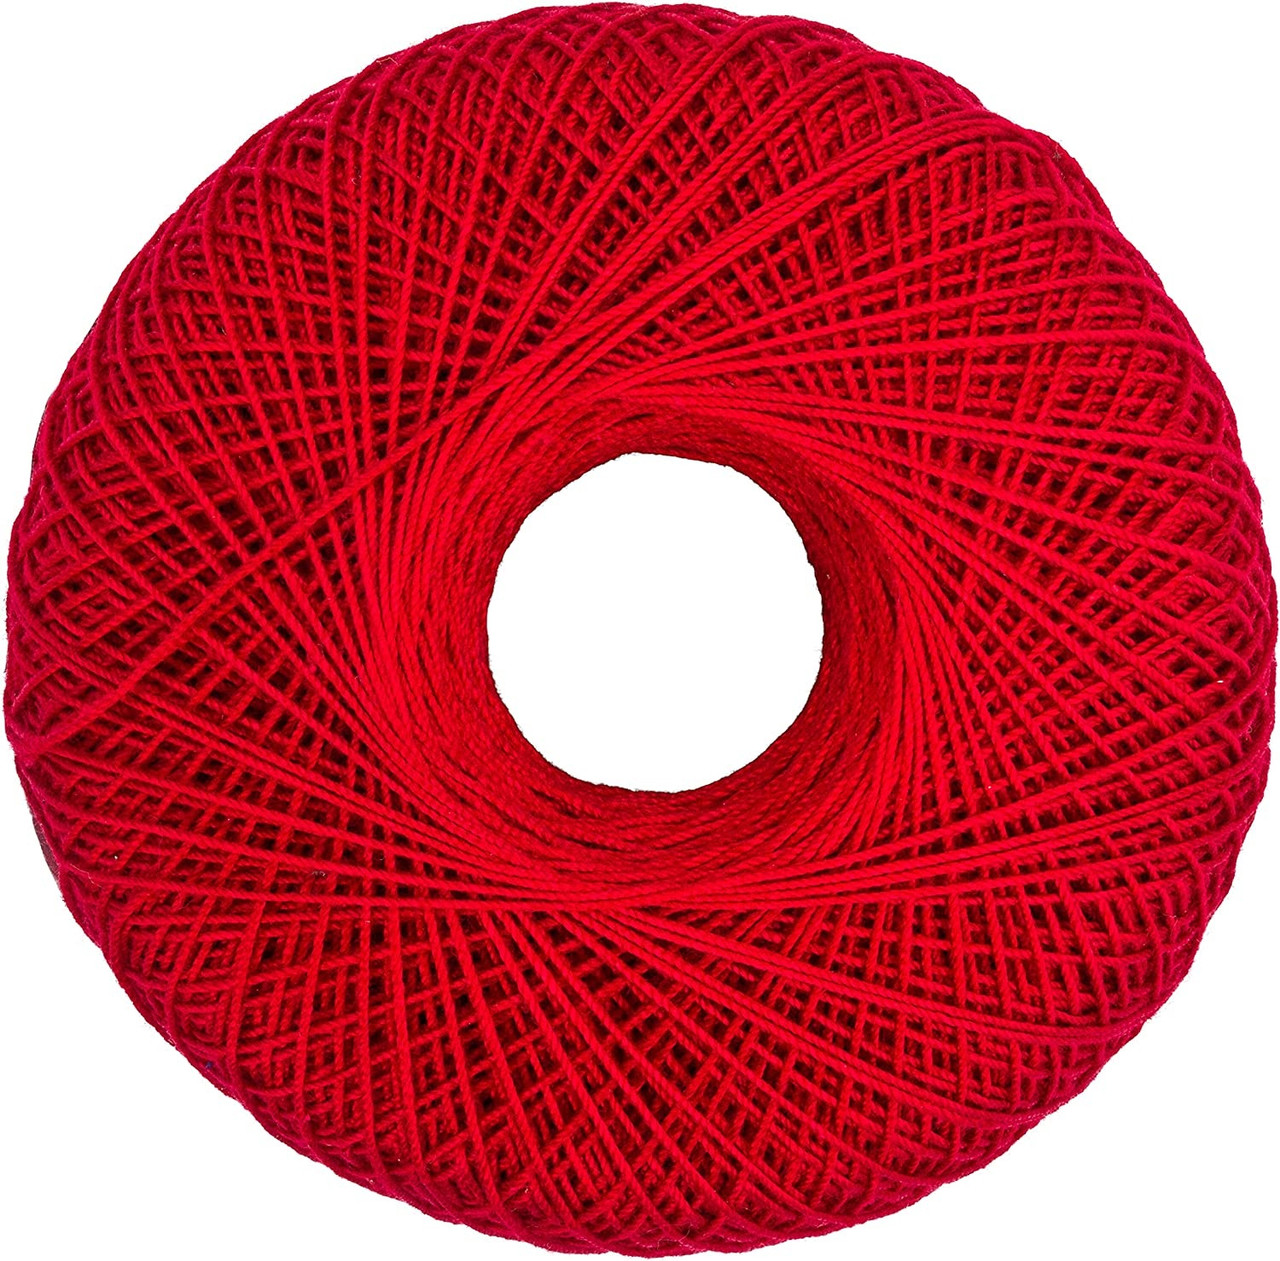 Aunt Lydia's Classic Crochet Thread Size 10 - Victory Red